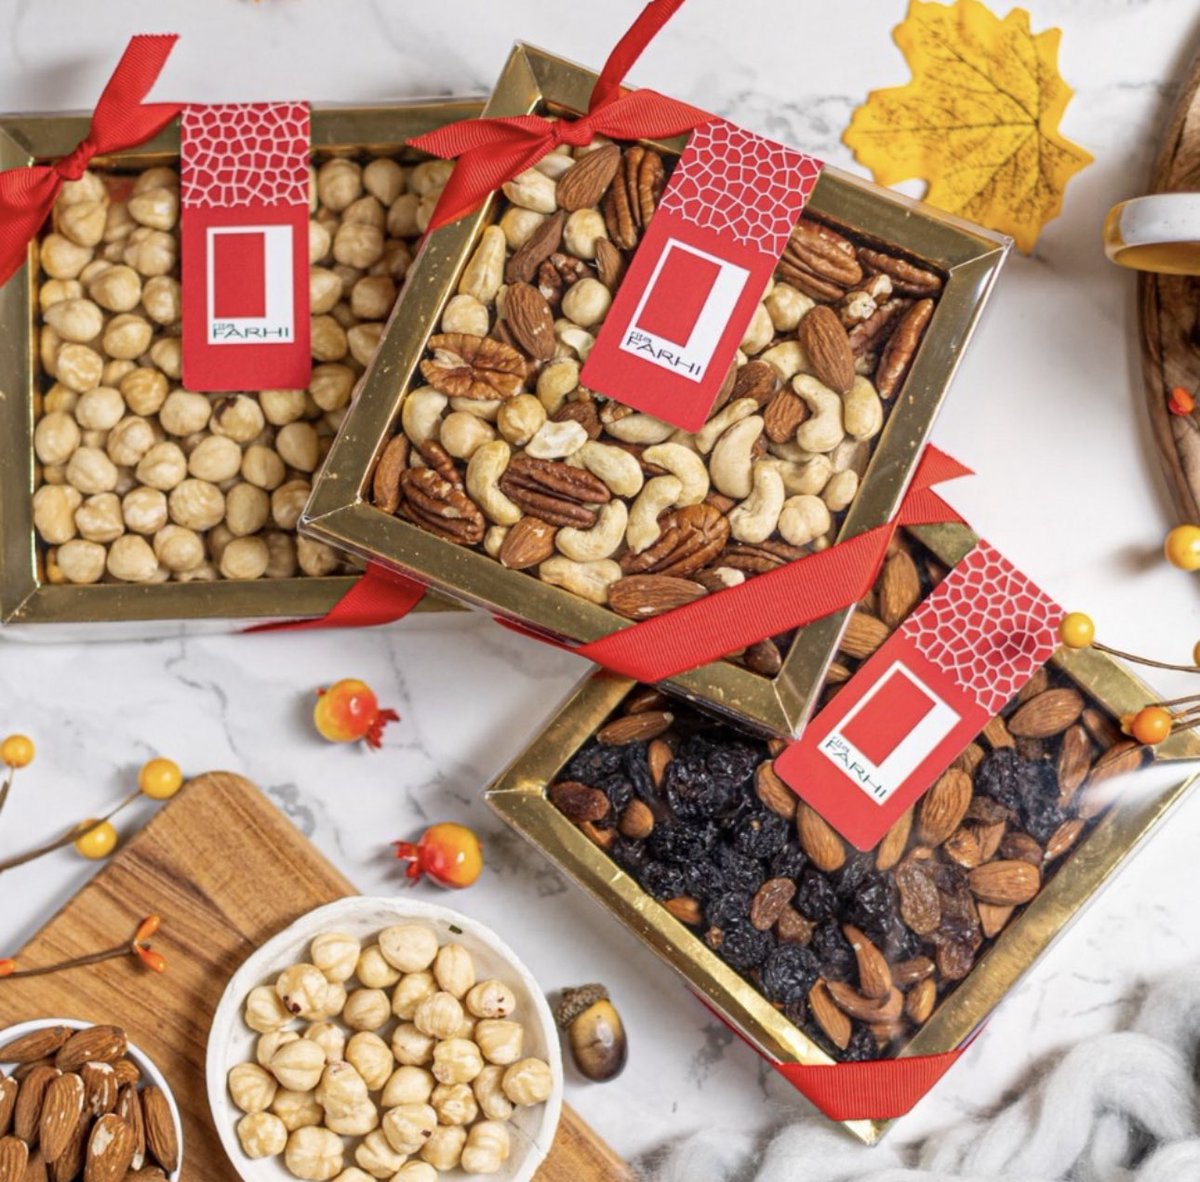 Getting ready for Autumn with our warm nut selection 🍂⁣

All of our nuts are hand-picked and sorted, to make sure that only the finest ones make it into our gift boxes.

Do you prefer our gold or red gift box?

#Farhi #nuts #hazlenuts #raisins #nutselection